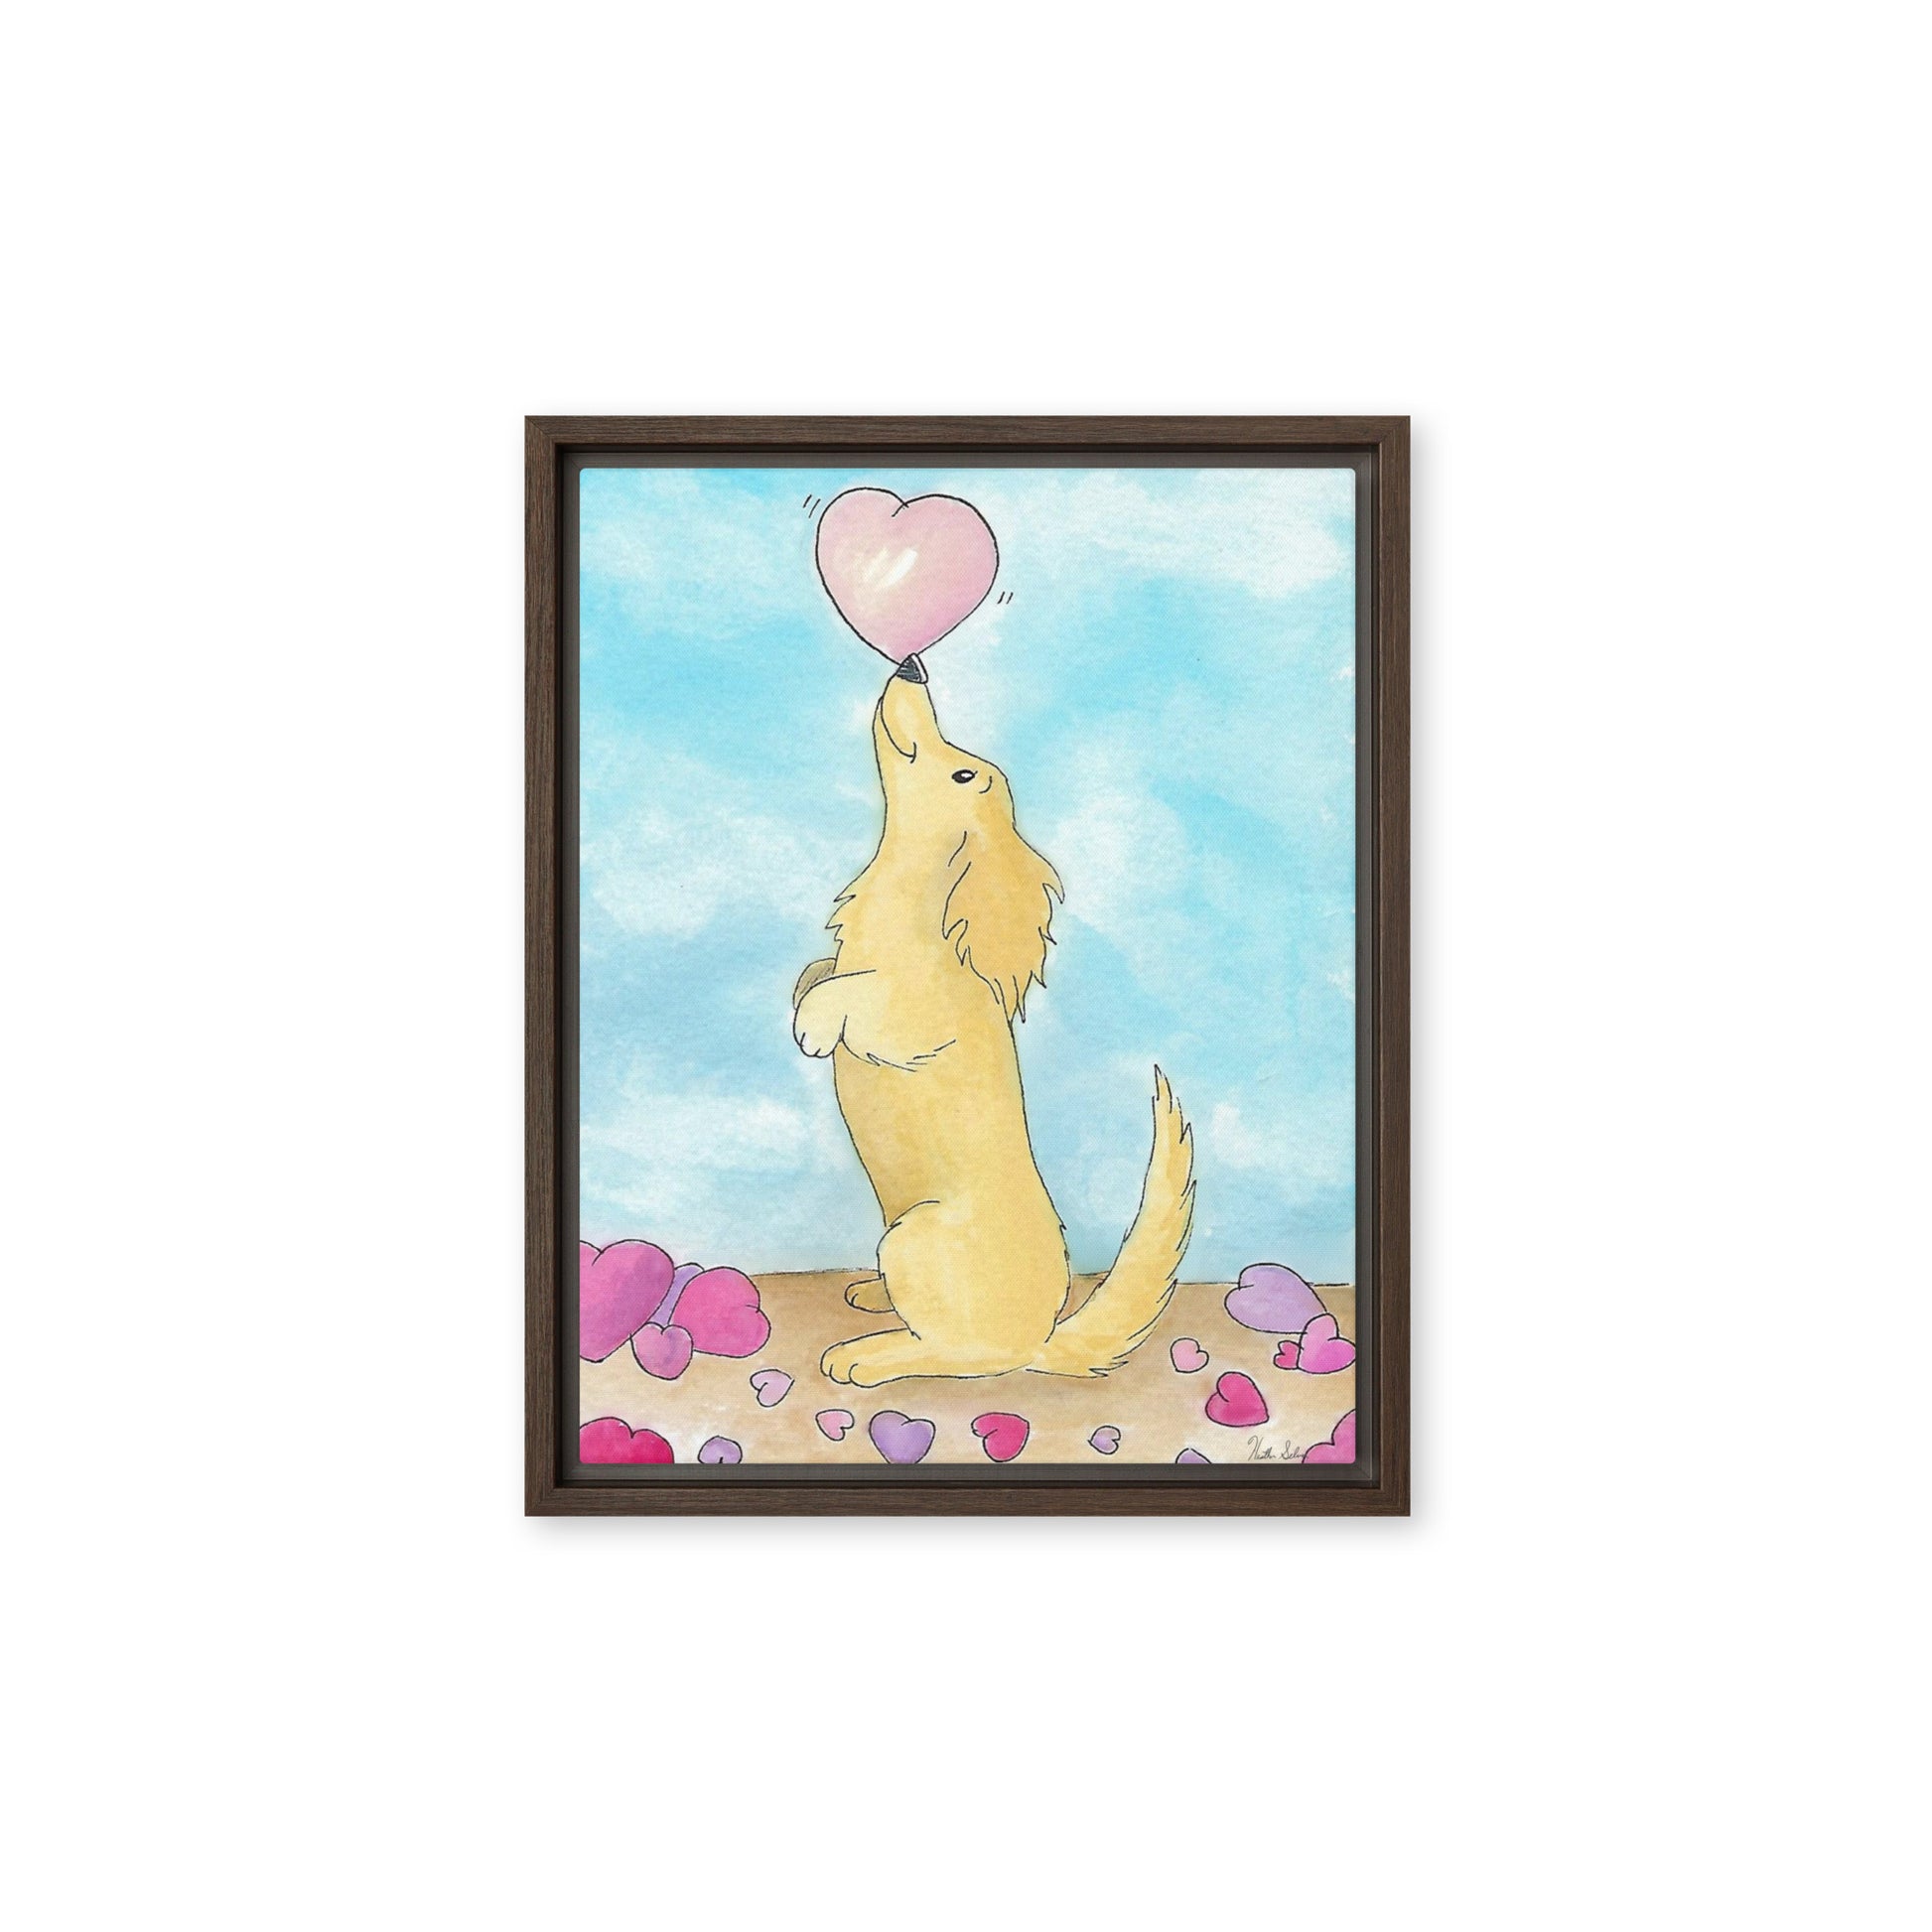 11 by 14 inch framed canvas Puppy Love print. The canvas is in a brown pine wood frame.